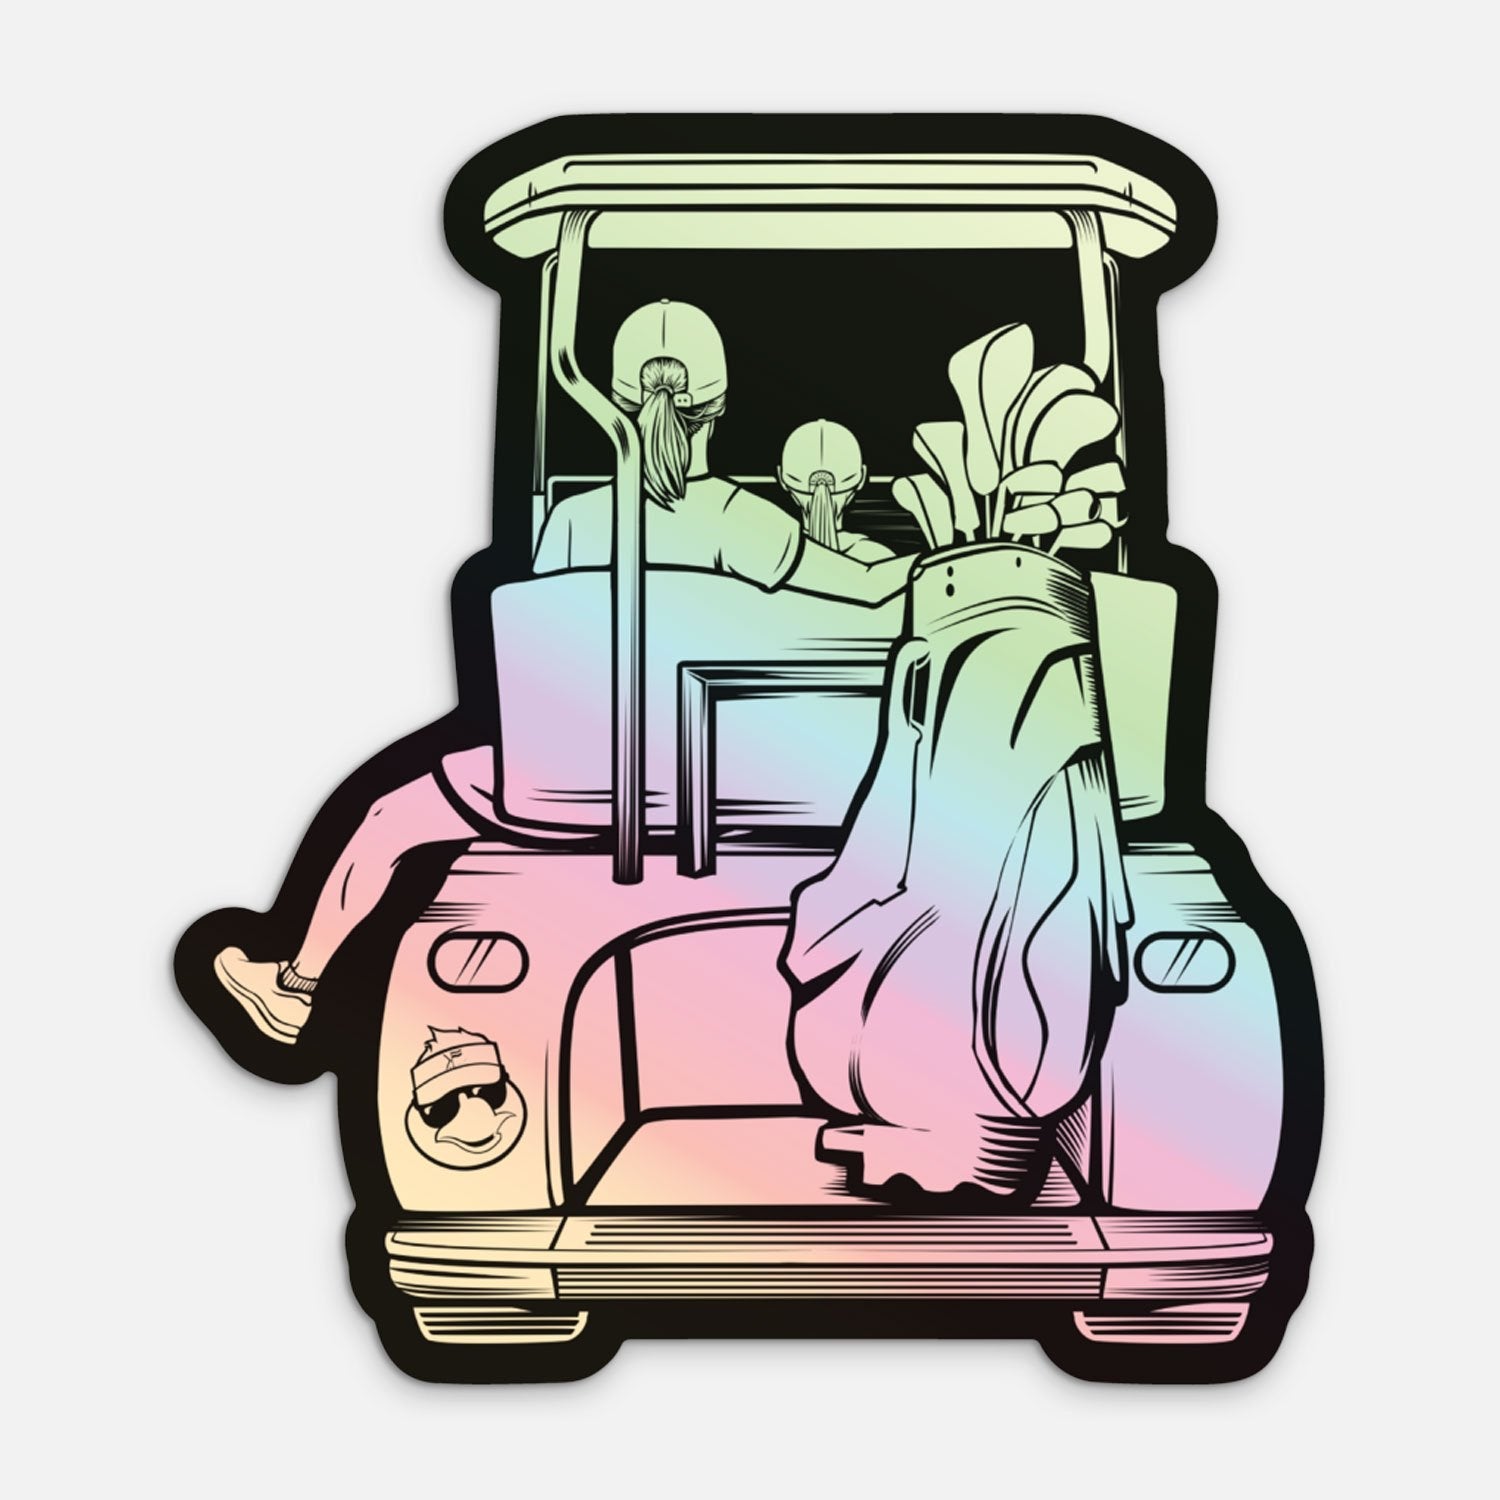 Mom & Daughter Golf Cart Holographic Sticker - F. King Golf